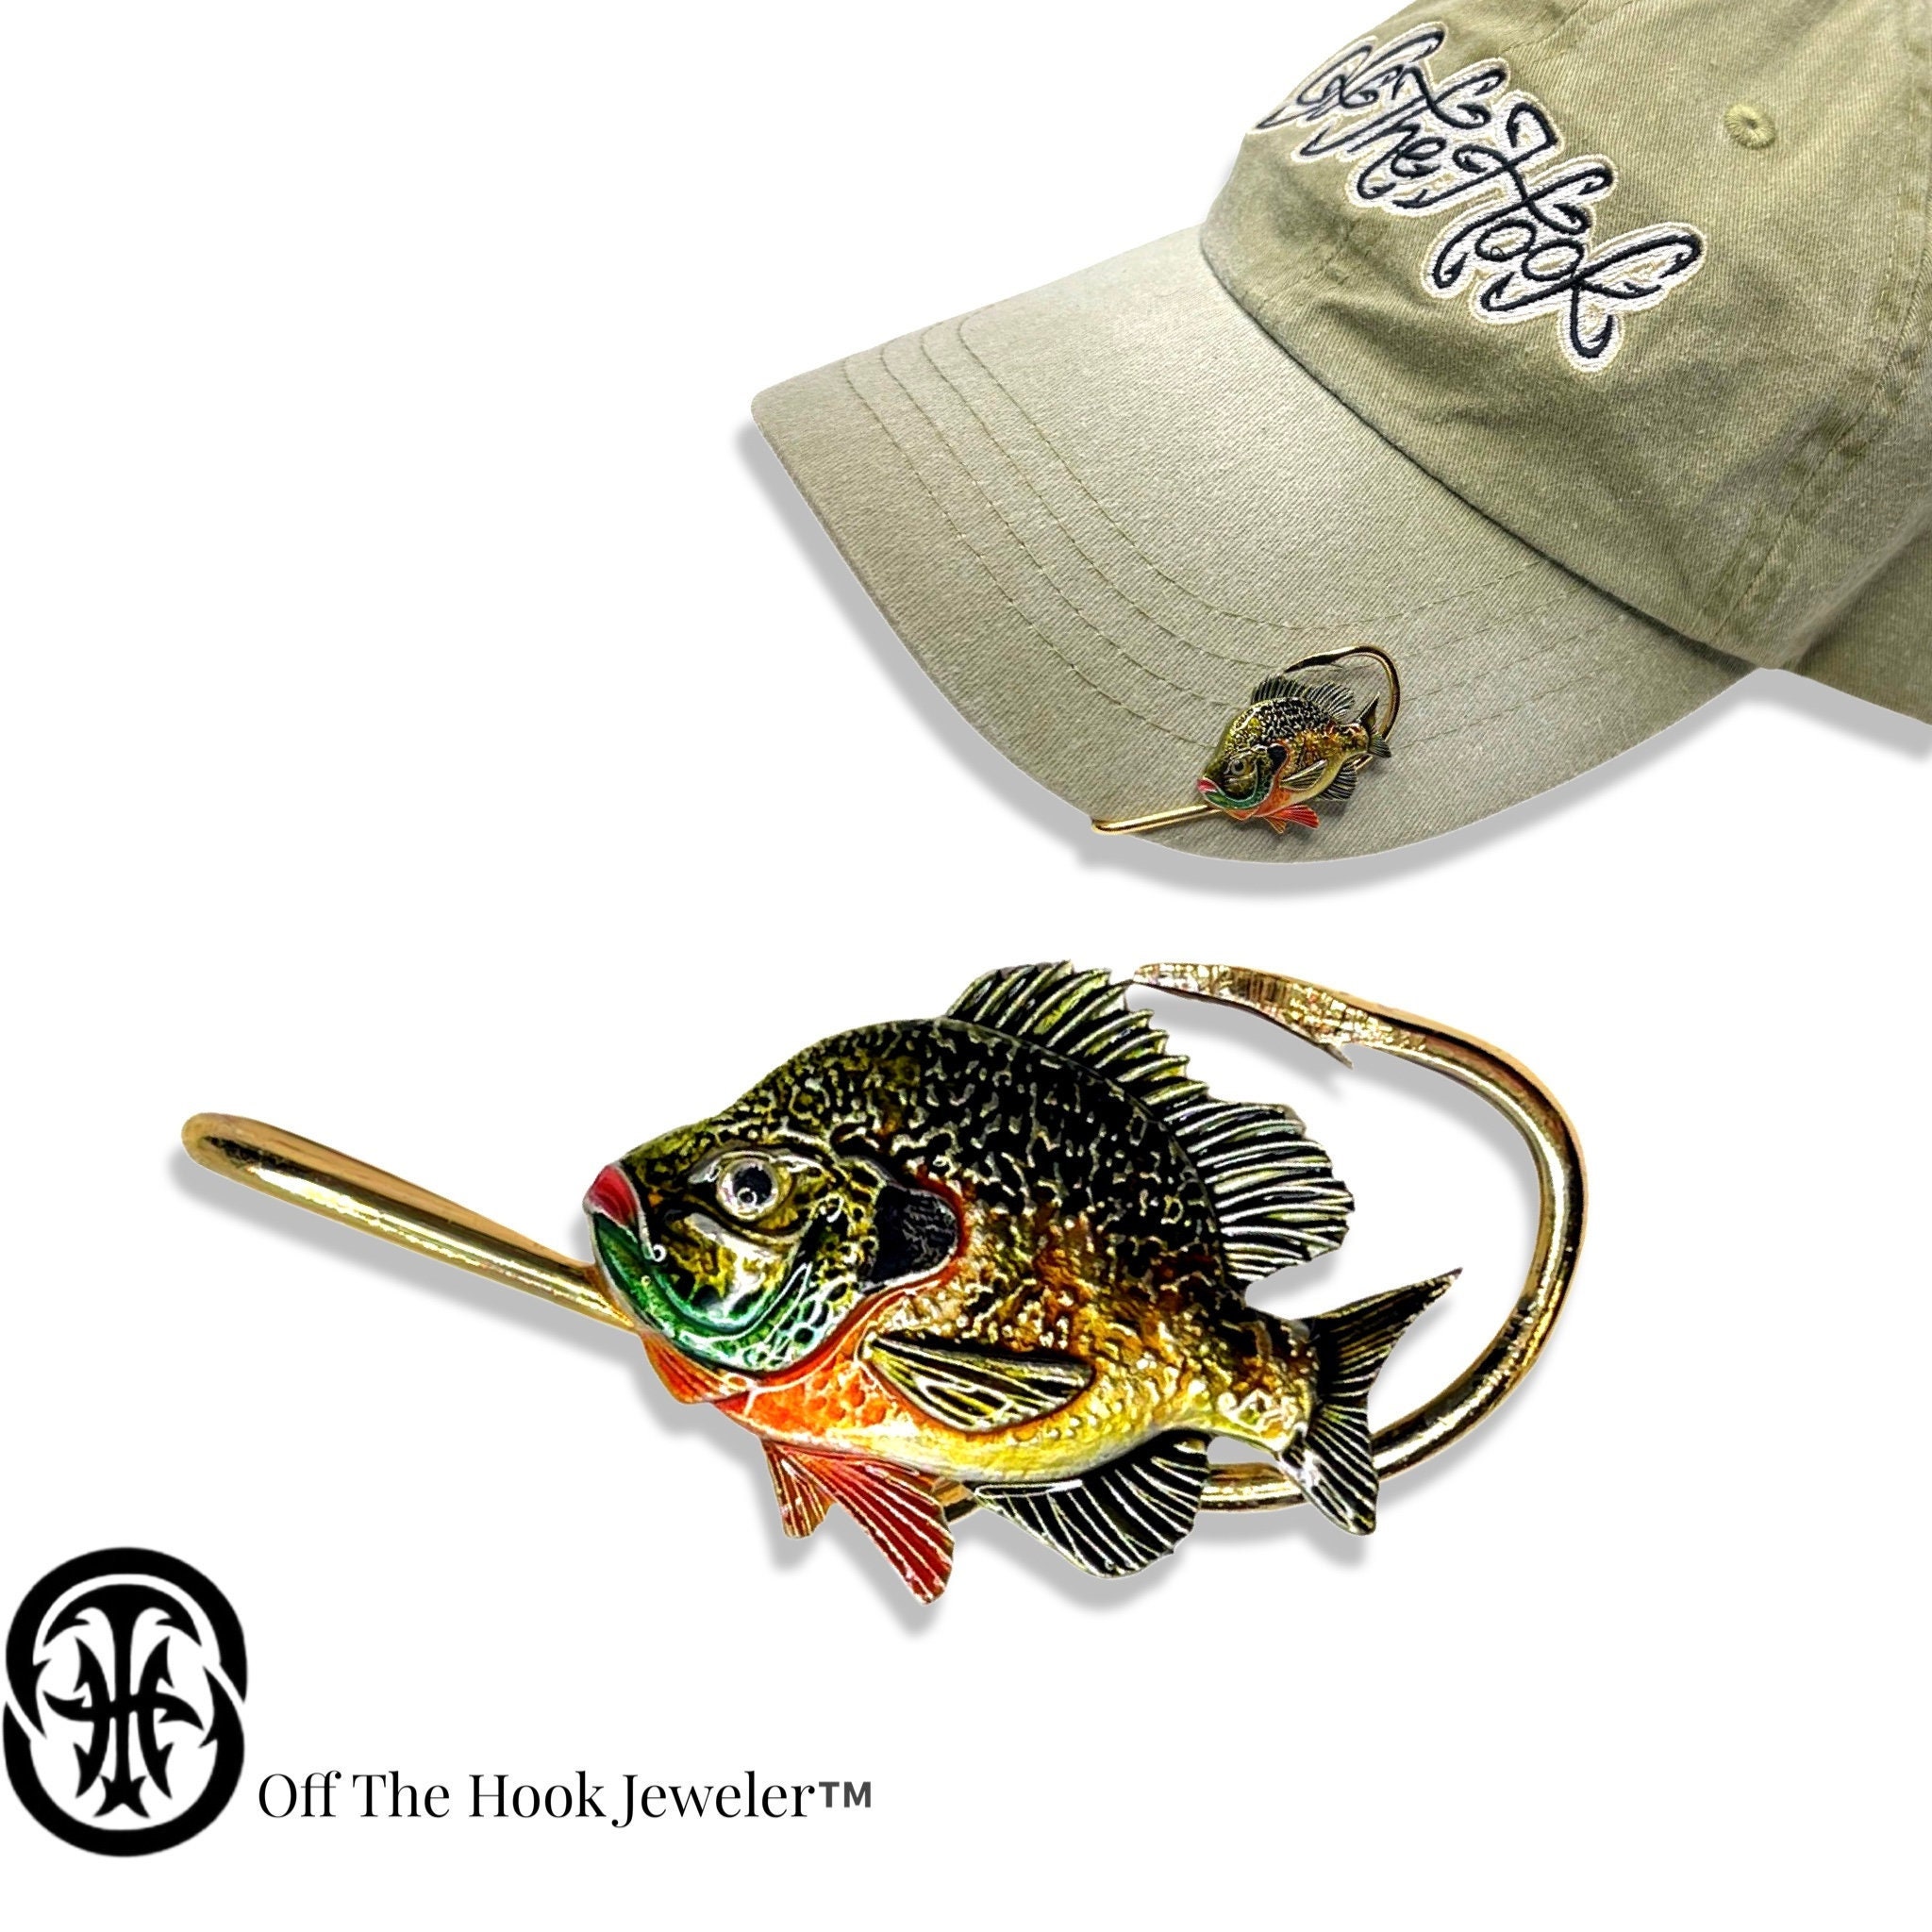 Eagle Claw Fish Hook Hat/Tie Clasp